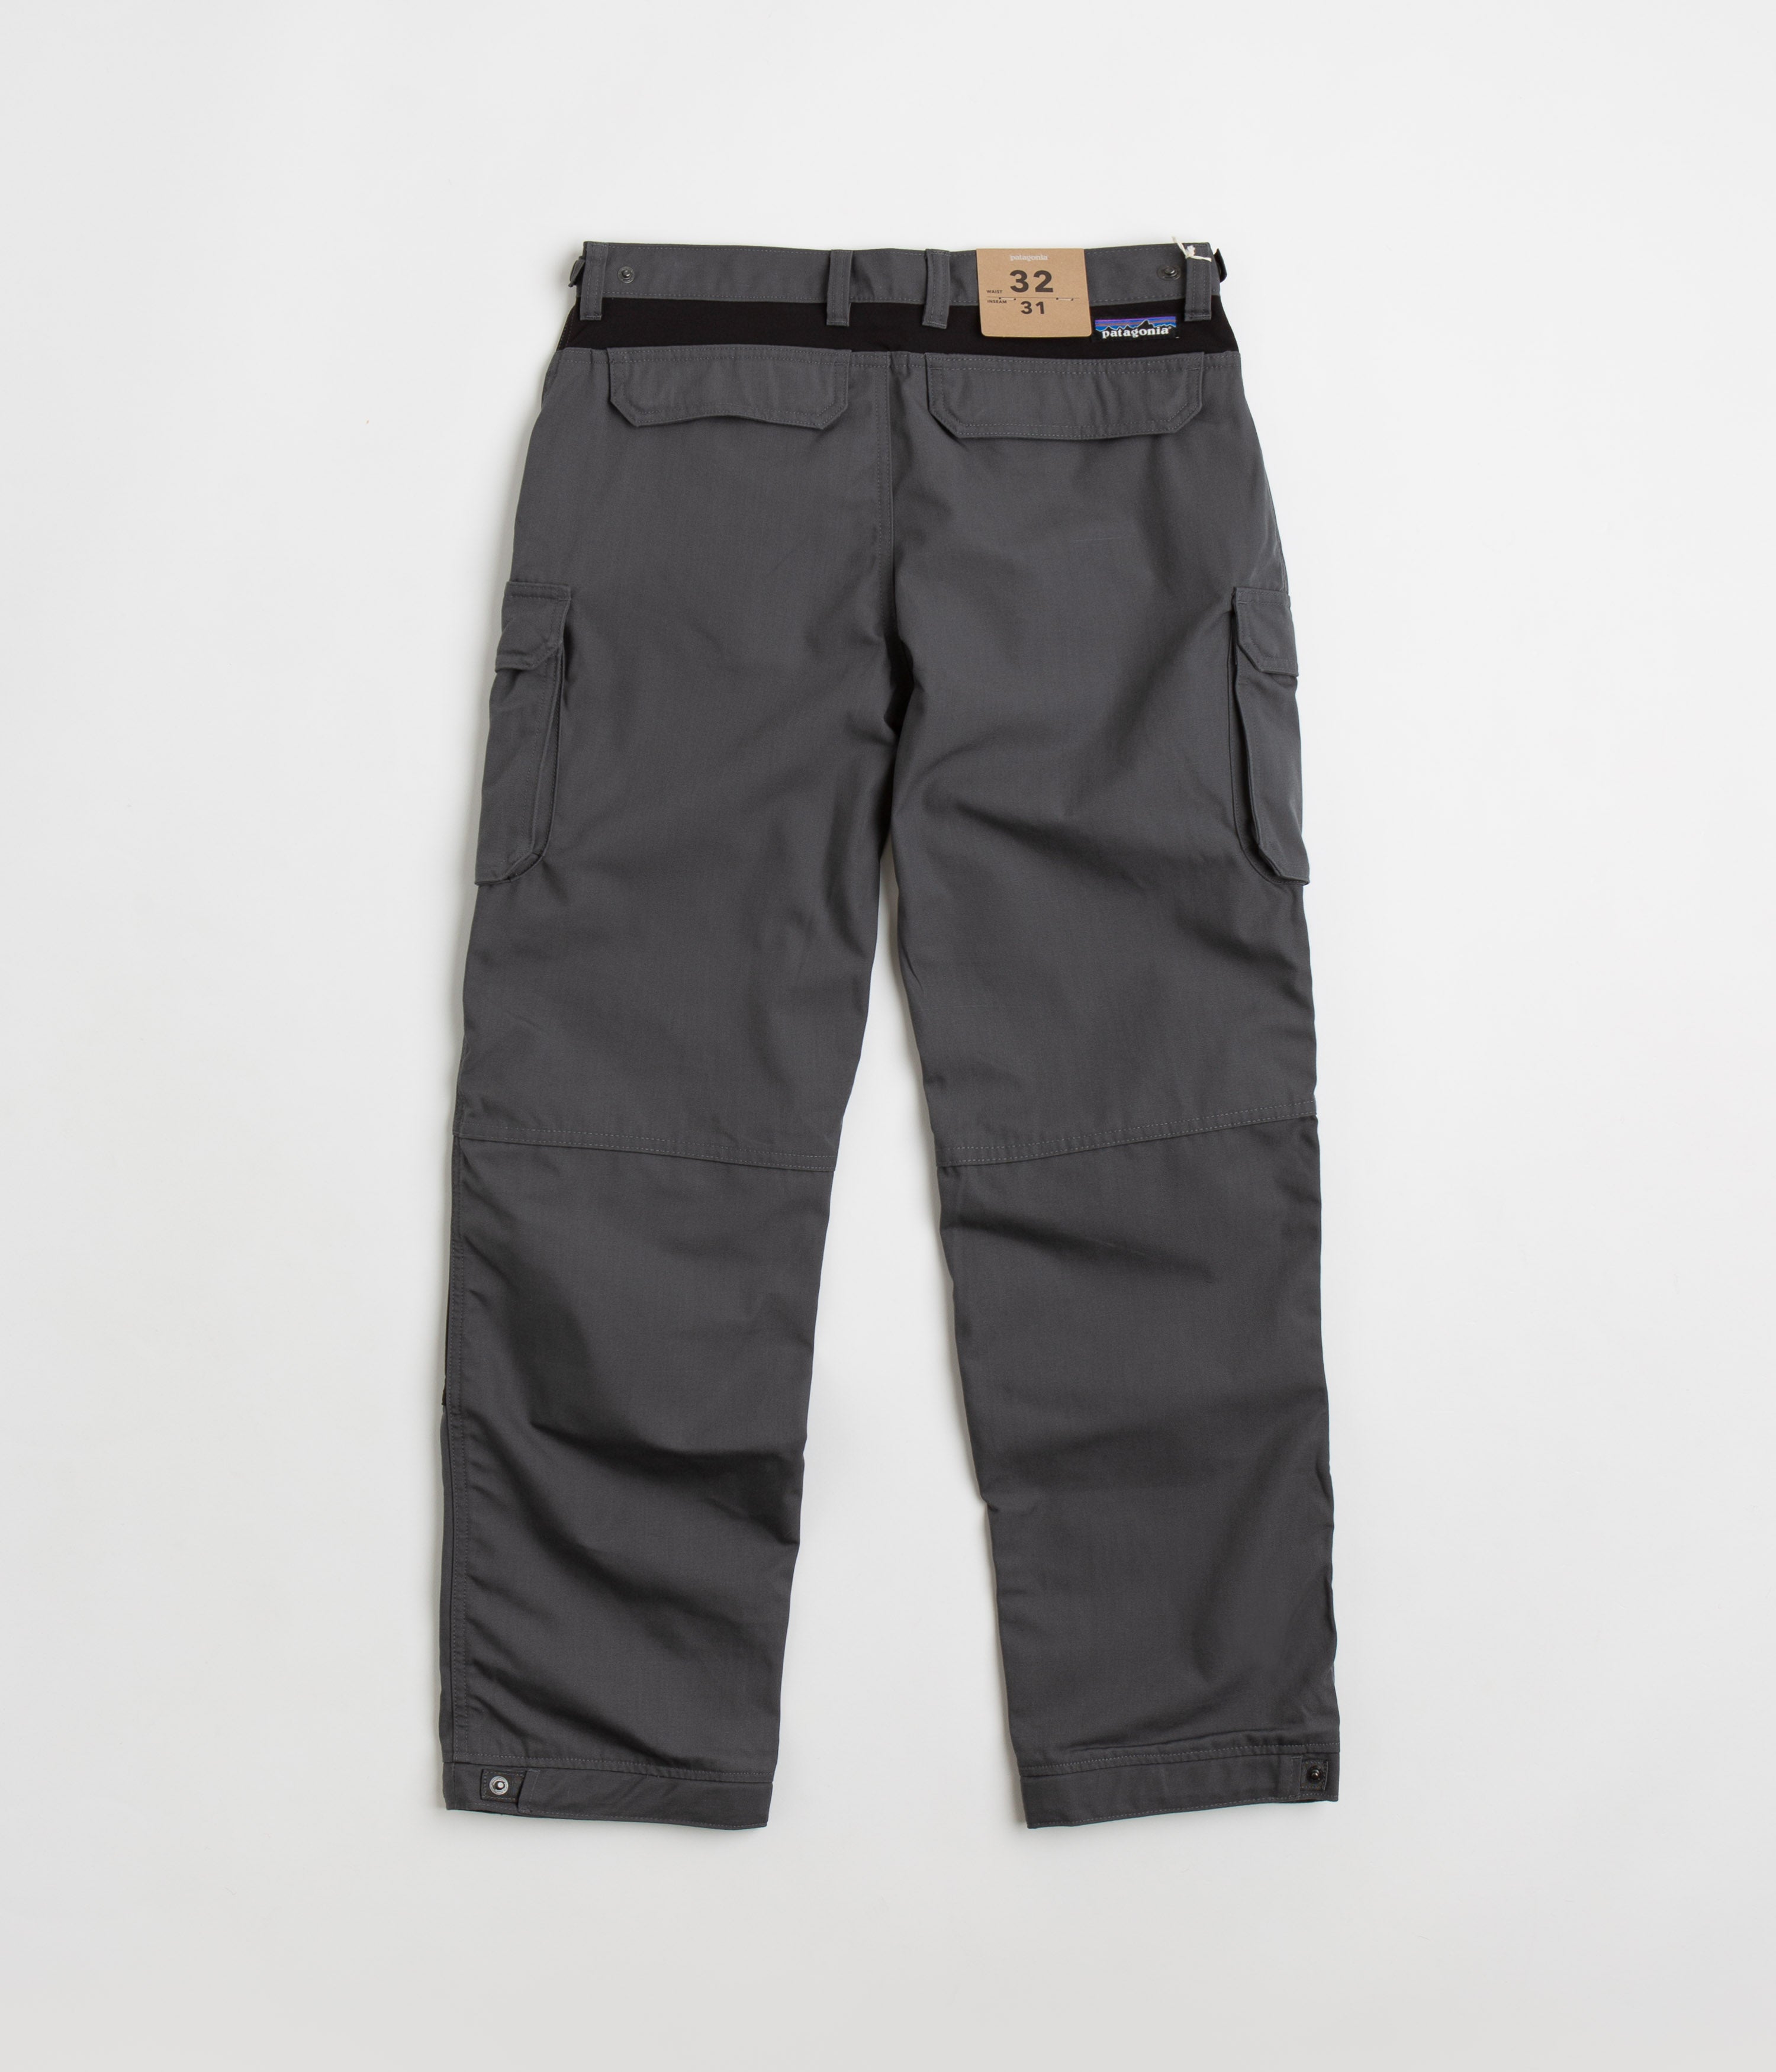 Patagonia Cliffside Rugged Trail Pants - Forge Grey | Flatspot